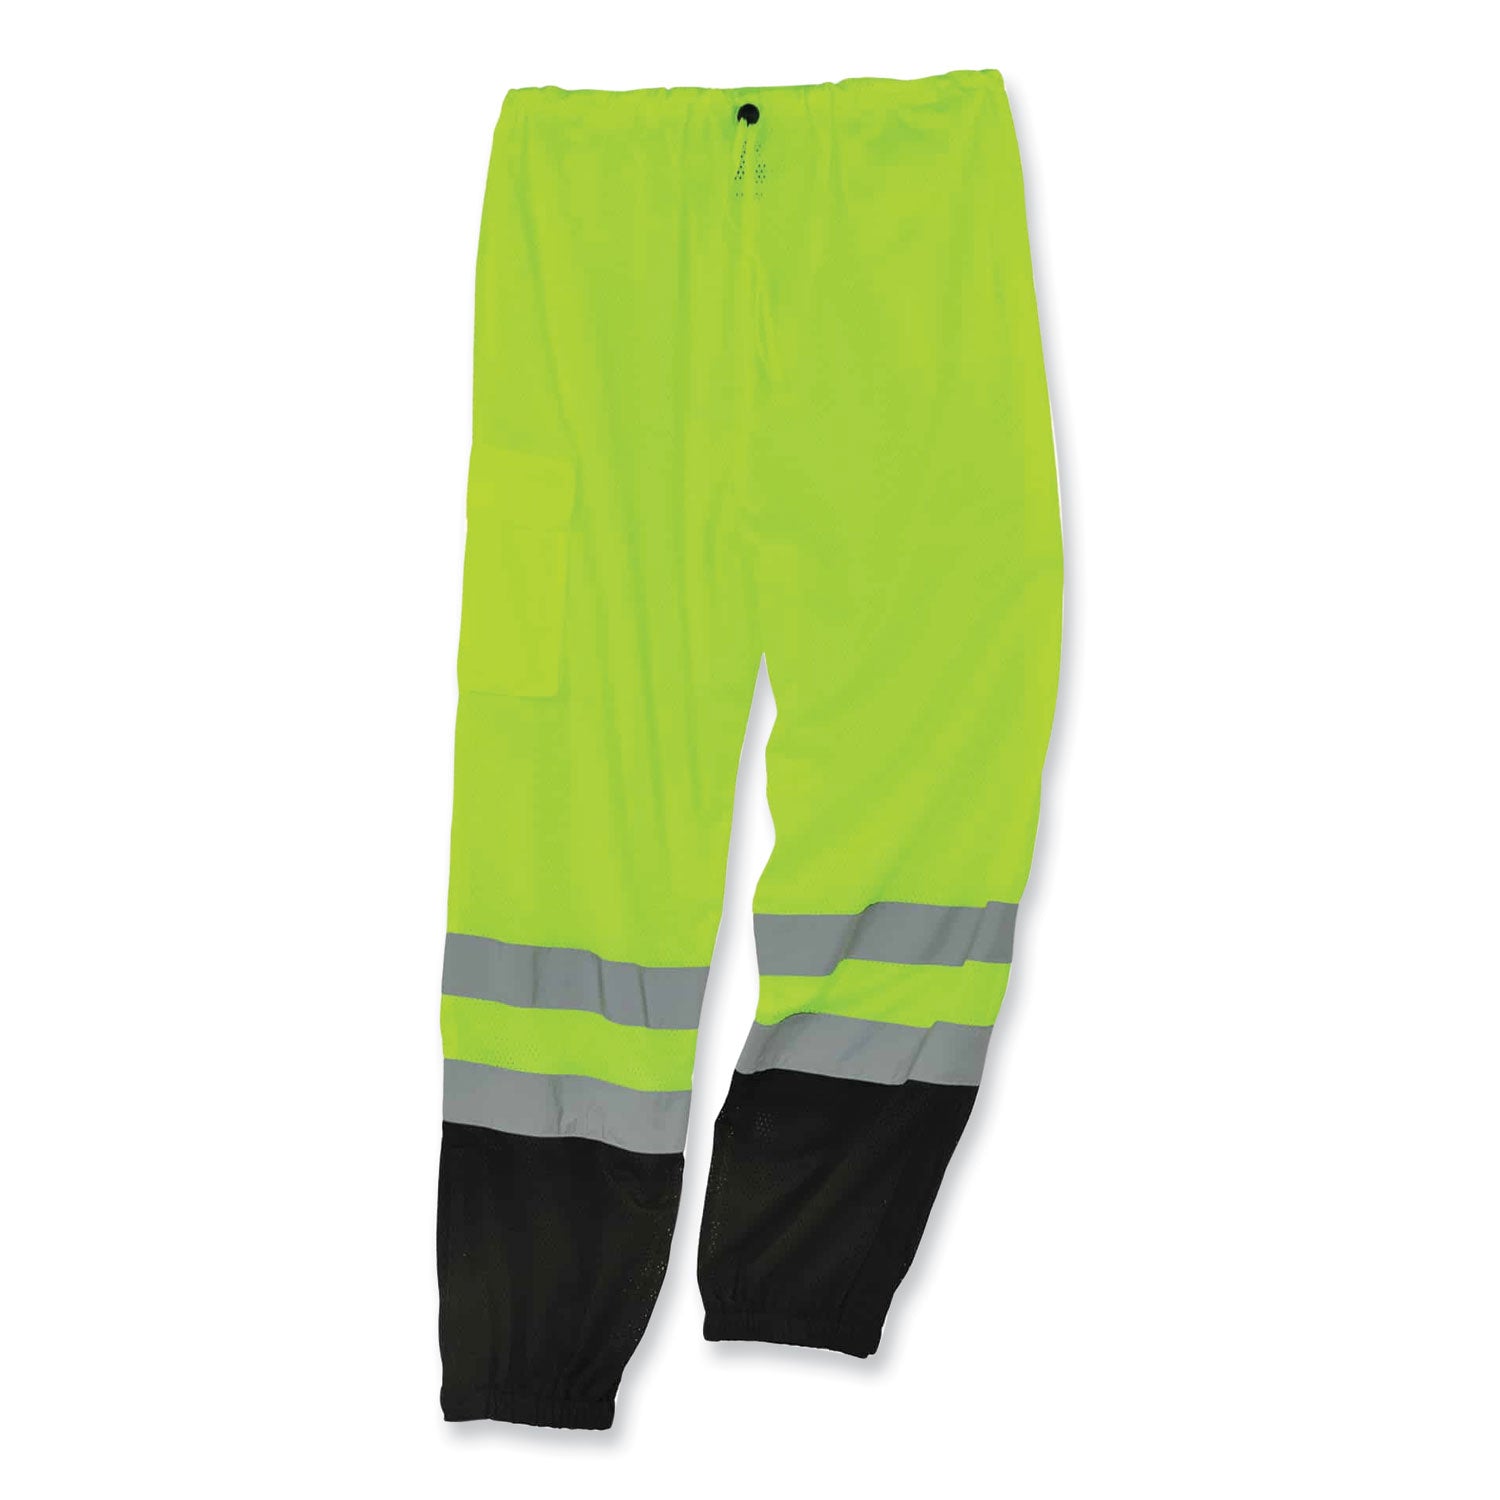 glowear-8910bk-class-e-hi-vis-pants-with-black-bottom-polyester-small-medium-lime-ships-in-1-3-business-days_ego23953 - 1